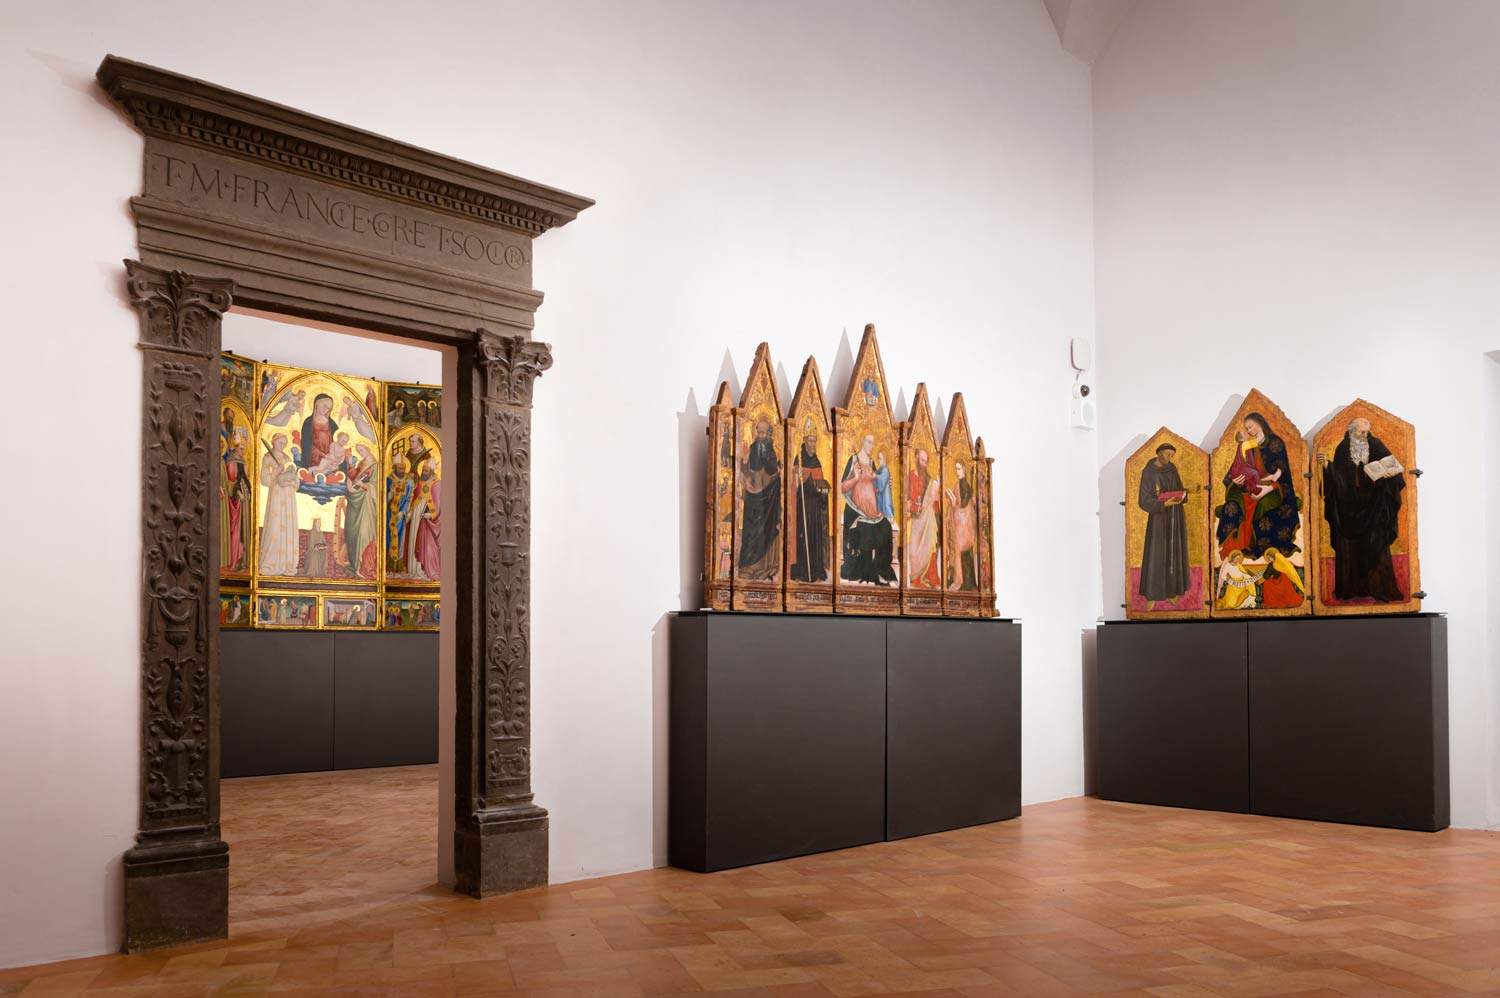 Perugia, National Gallery of Umbria reopens with new layout and many new features